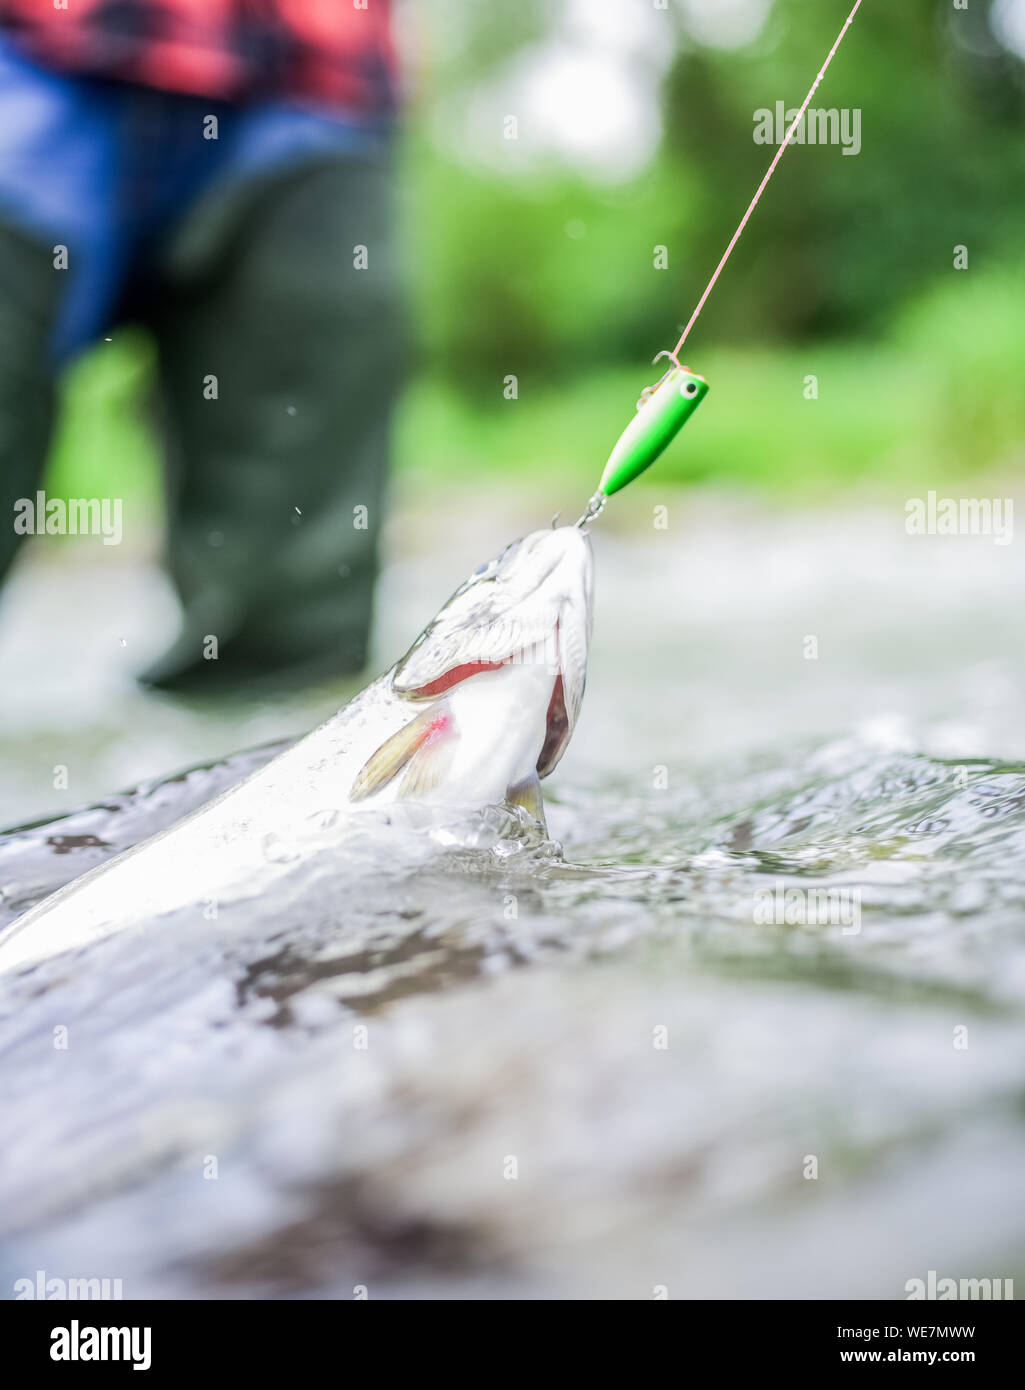 https://c8.alamy.com/comp/WE7MWW/freshwater-fish-on-hook-trout-in-water-close-up-fishing-hobby-fishing-activity-fishing-equipment-wild-nature-fish-in-river-gear-and-bait-concept-fisherman-job-is-simple-fins-and-scales-WE7MWW.jpg